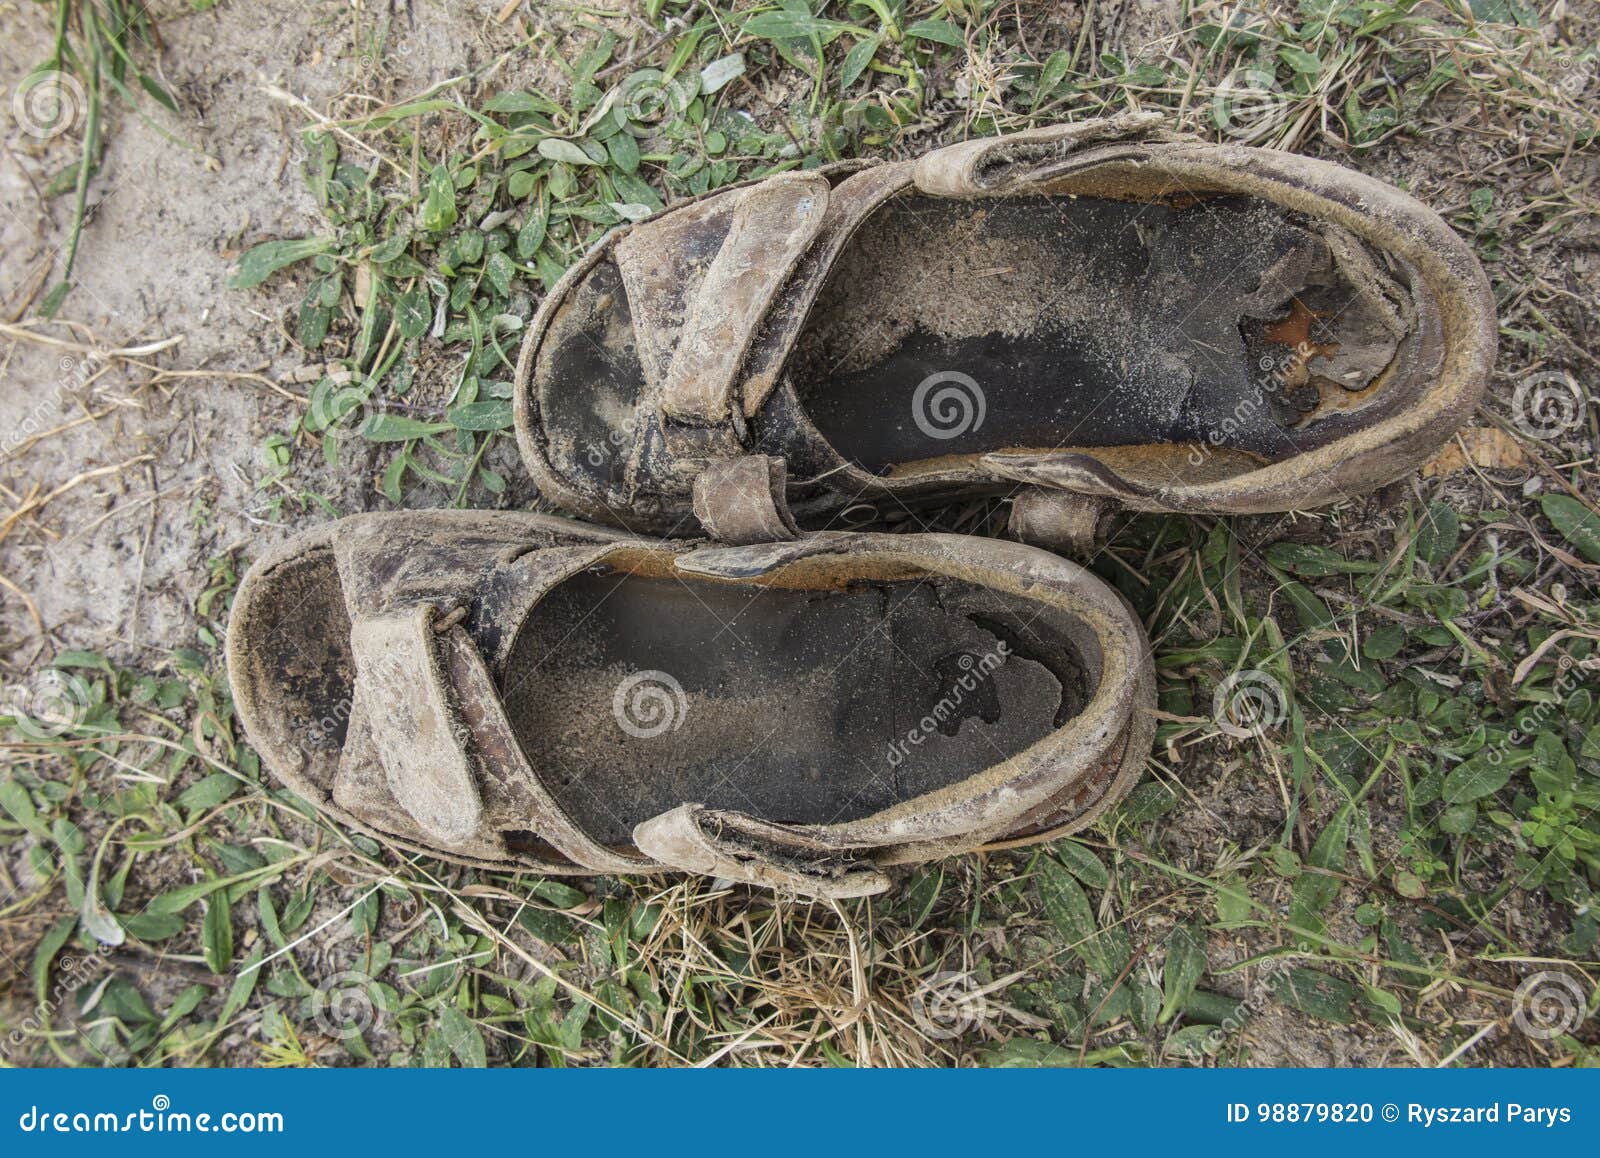 Sandals Old, Worn Out Being Based Stock Photo - Image of destroyed ...